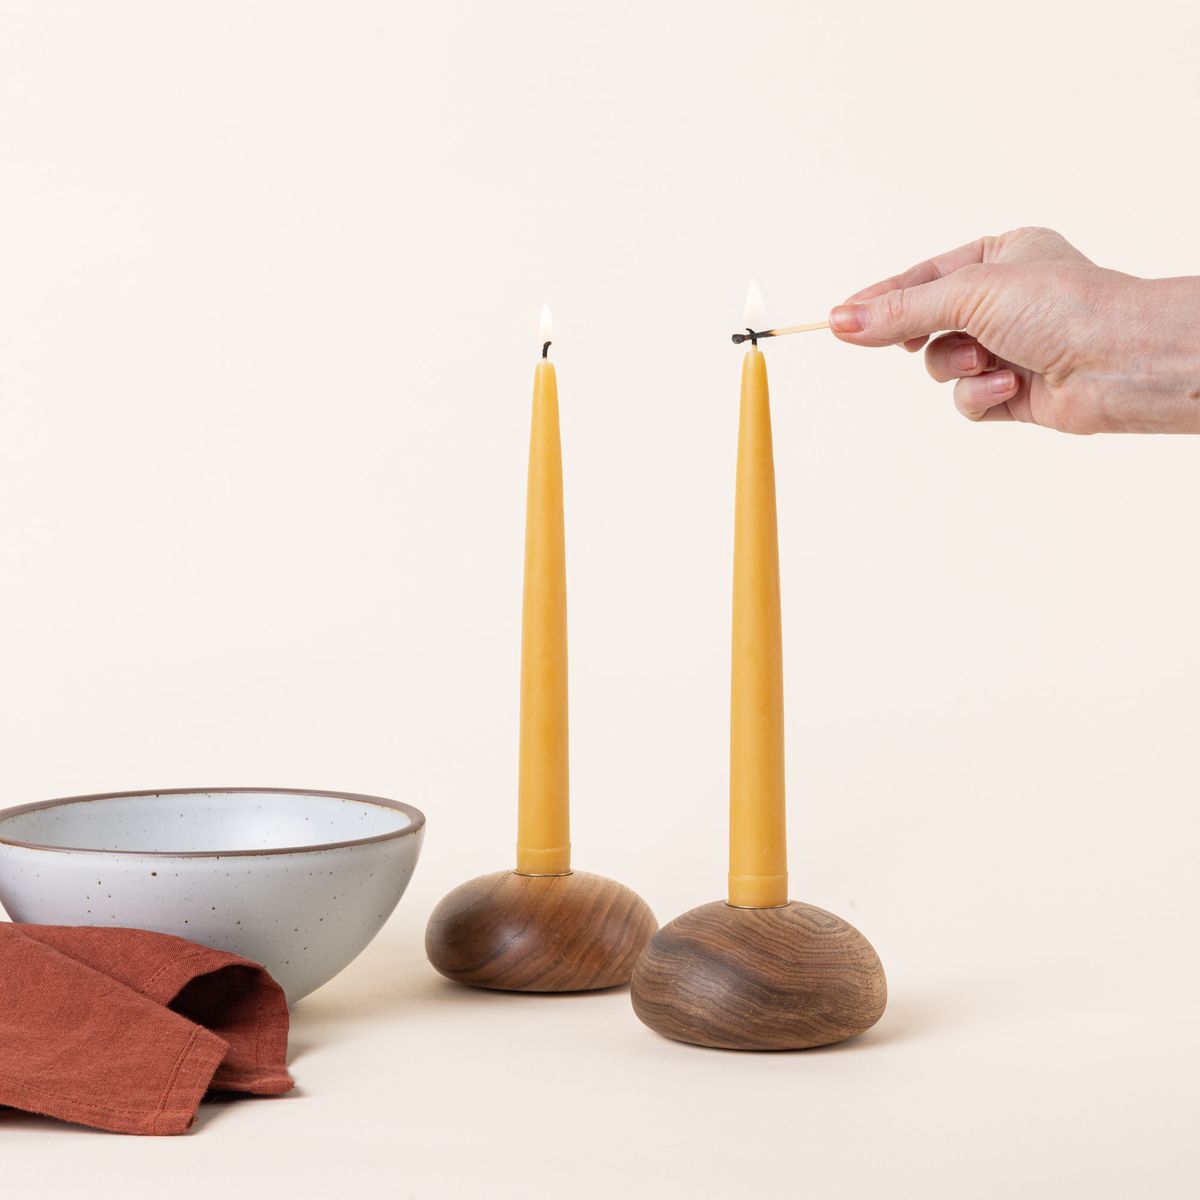 A hand lights a pair of yellow beeswax taper candles sitting in round wooden candle holders